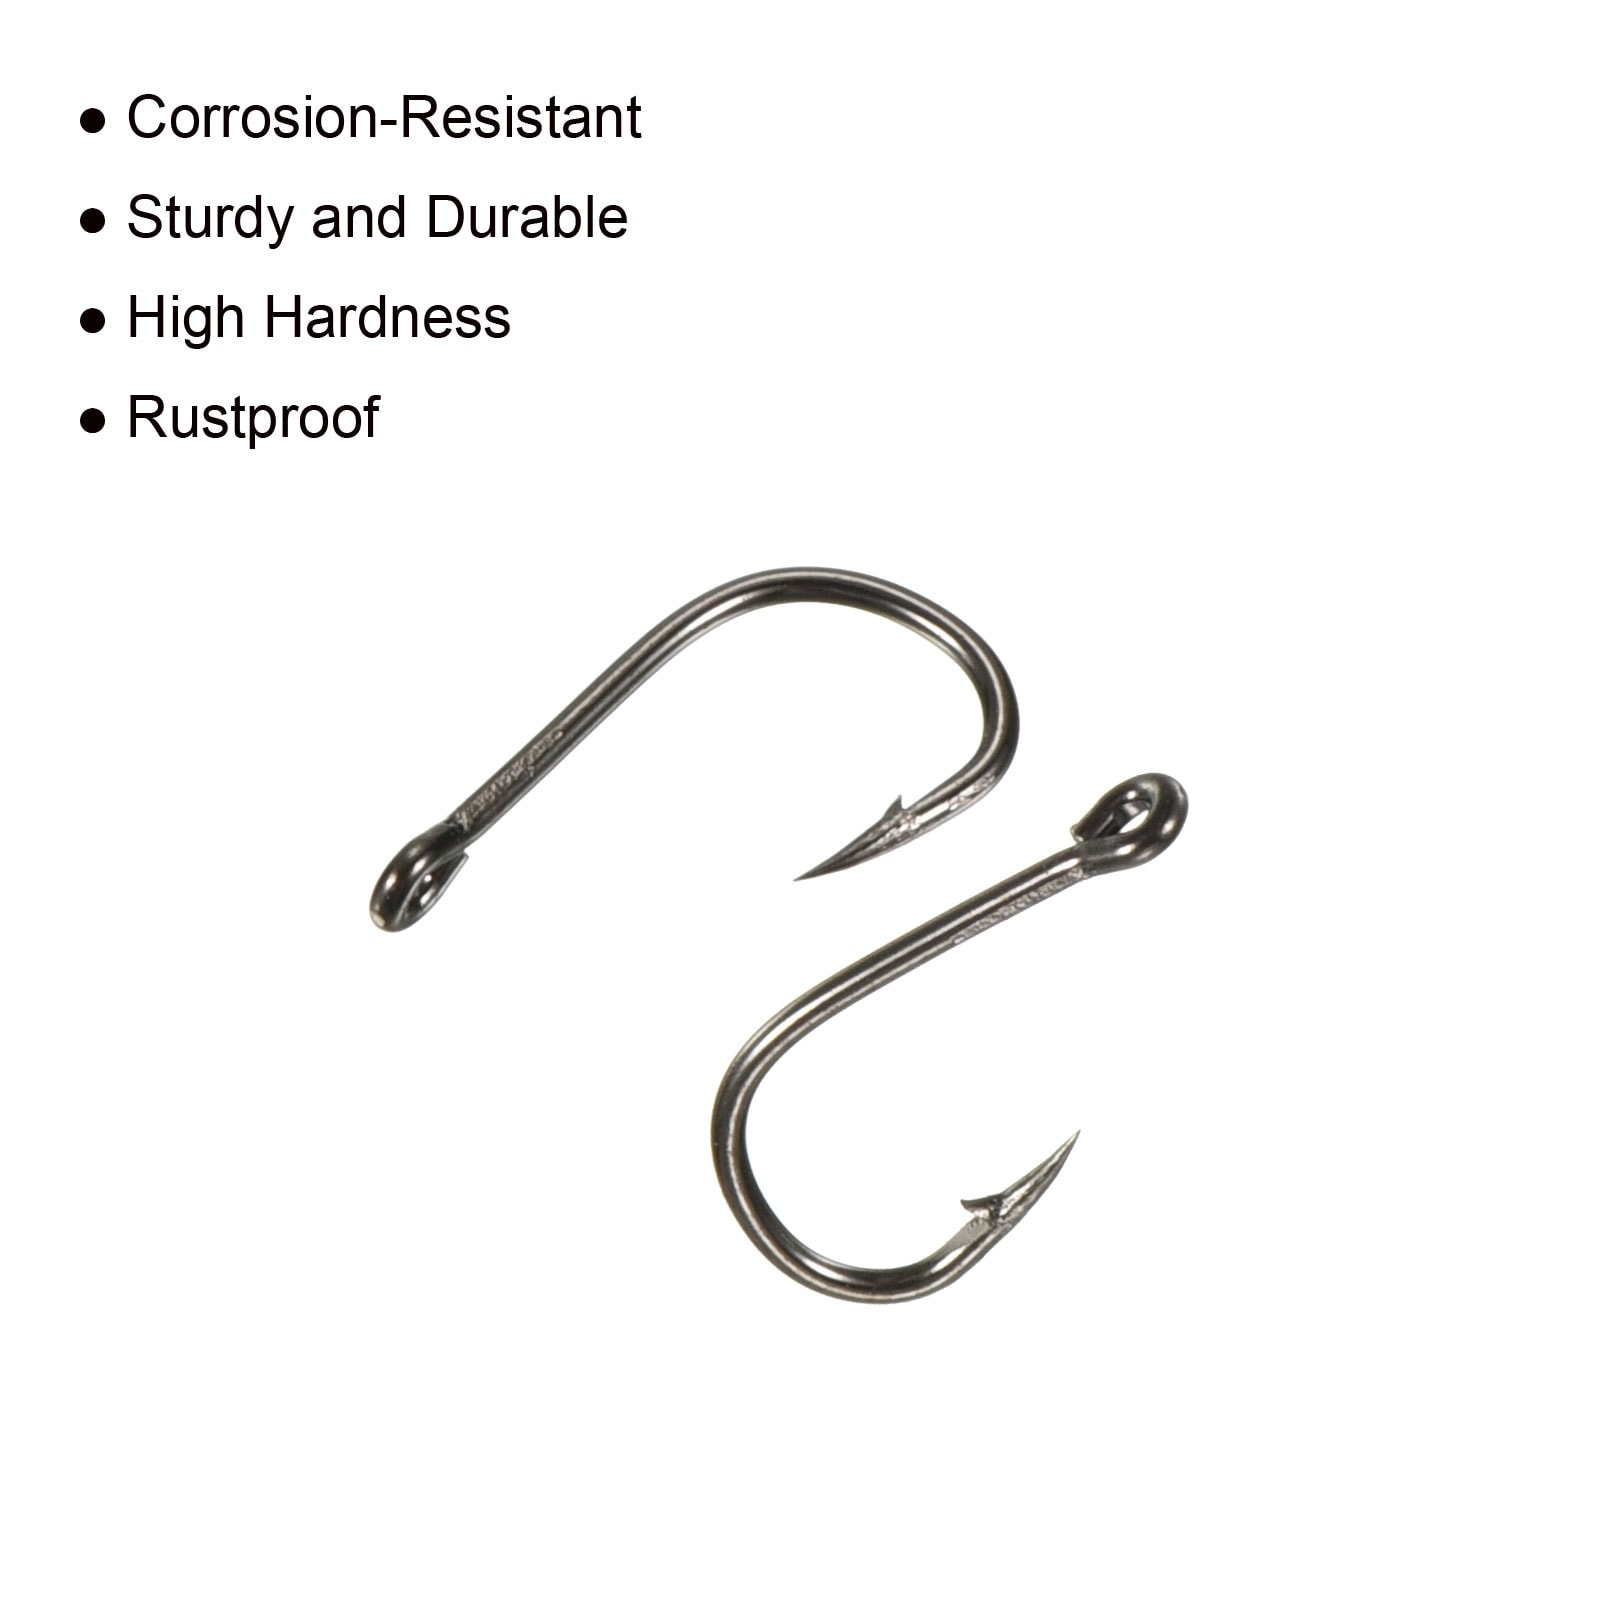  Abaodam 1000 Pcs Fishing Gear Catfishing Tackle Fish Hook for  Seawater Fish Hooks Barbed Fishing Hooks Fishing Stuff Fish Gear Fish  Equipment Small Hook Manage and Pay High-Carbon Steel 